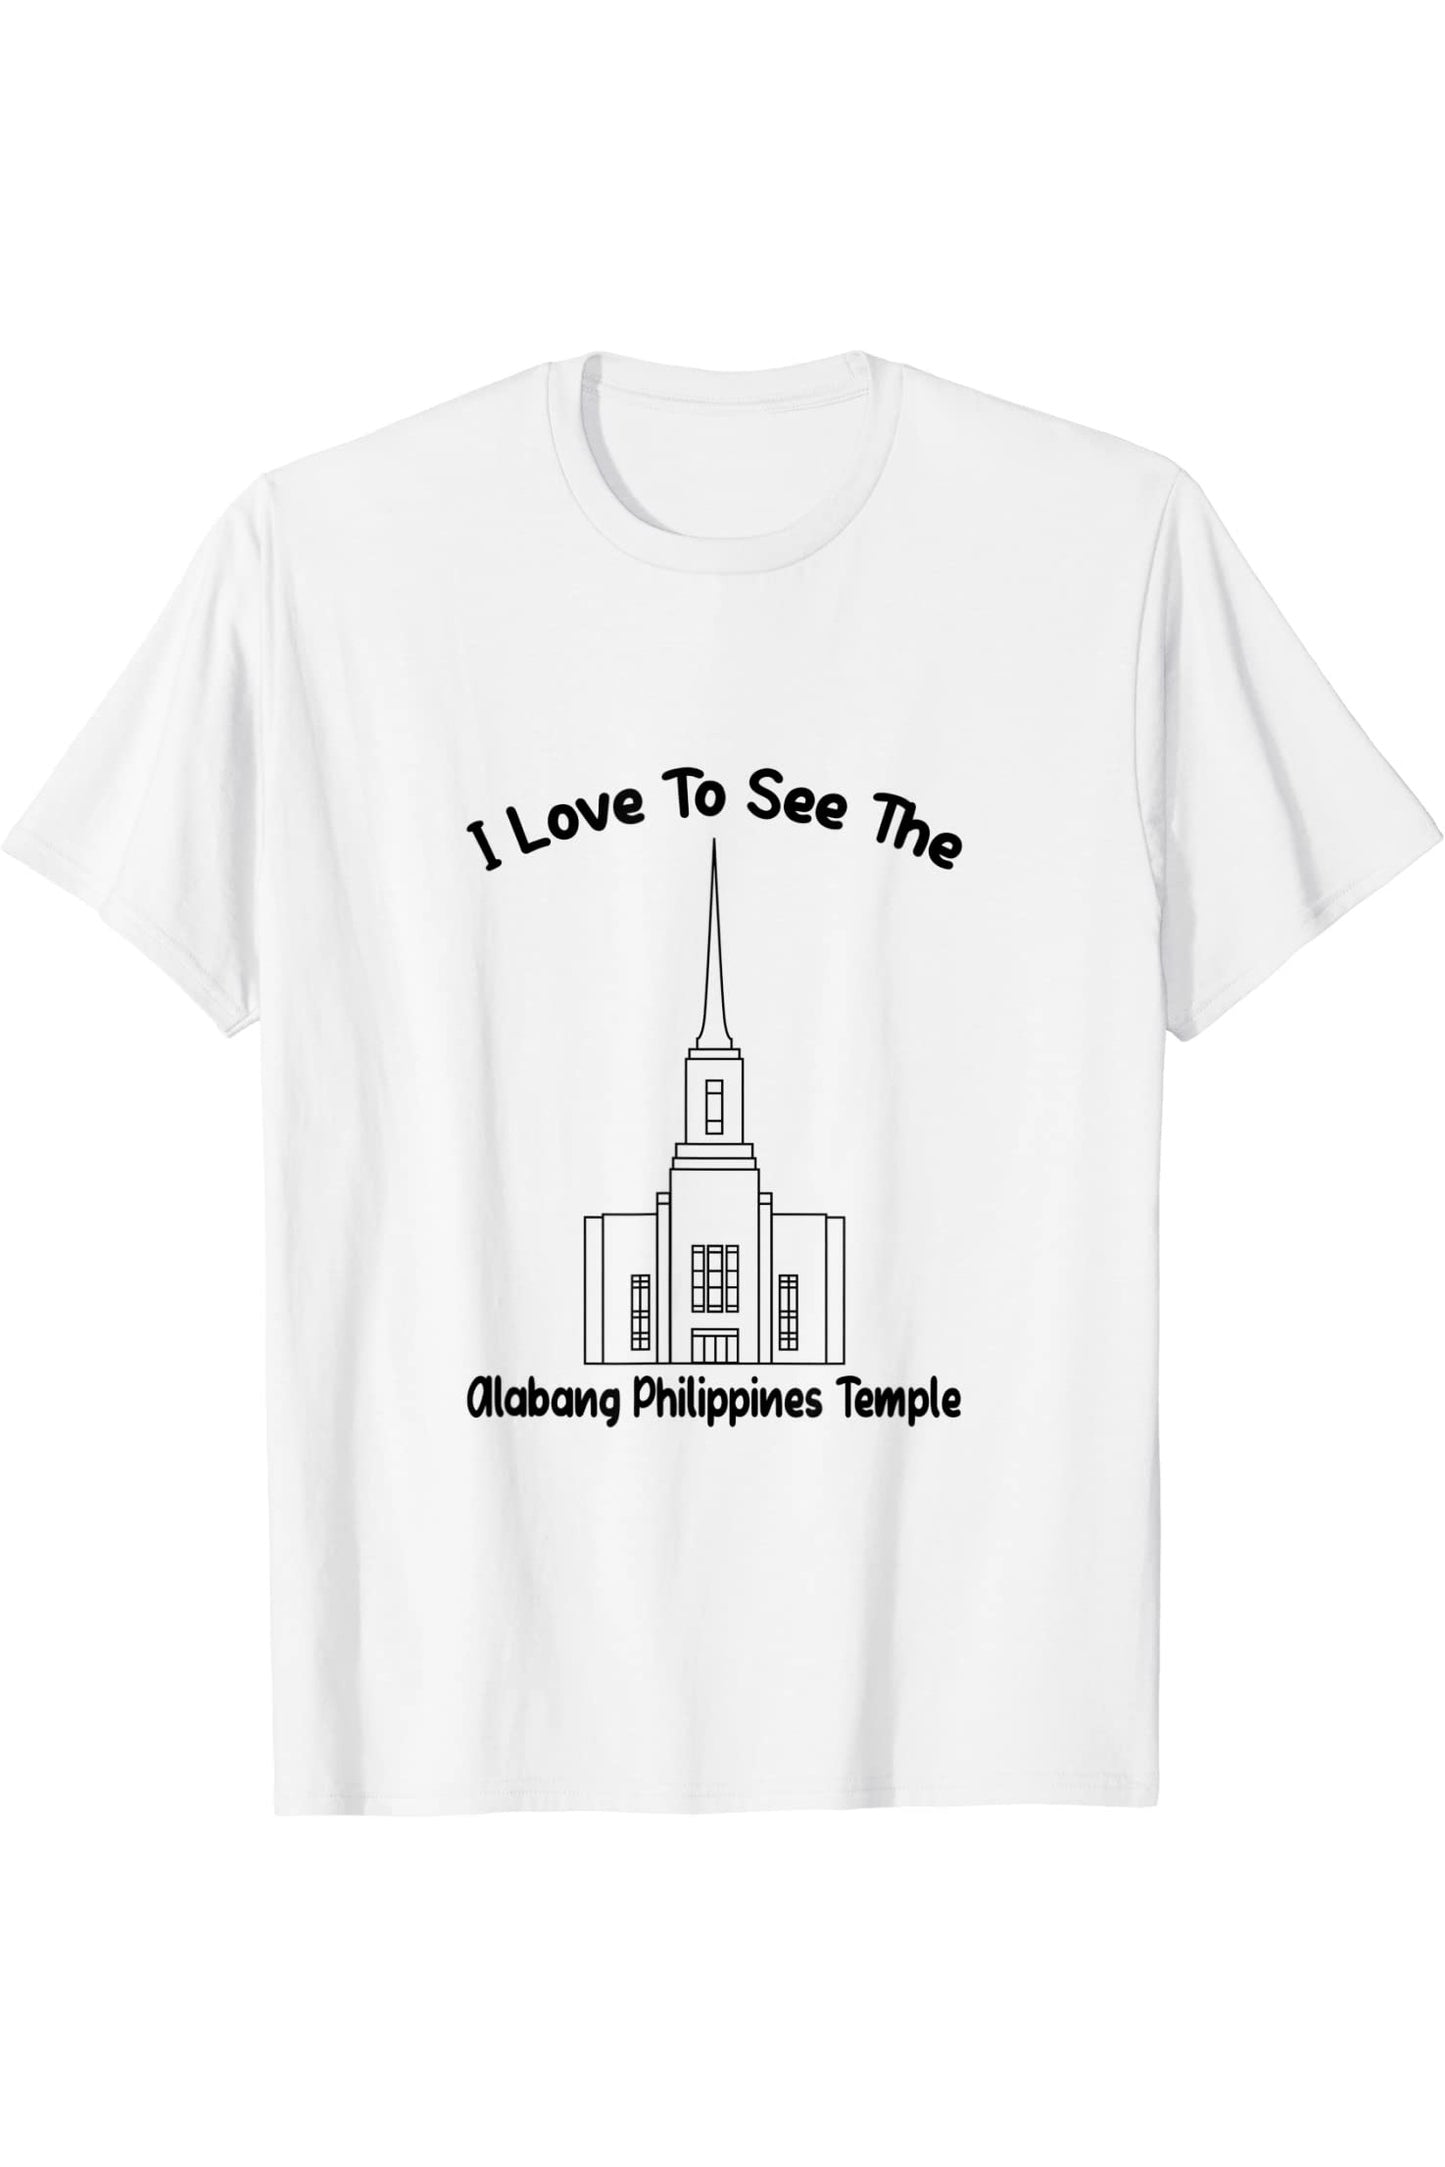 Alabang Philippines Temple T-Shirt - Primary Style (English) US